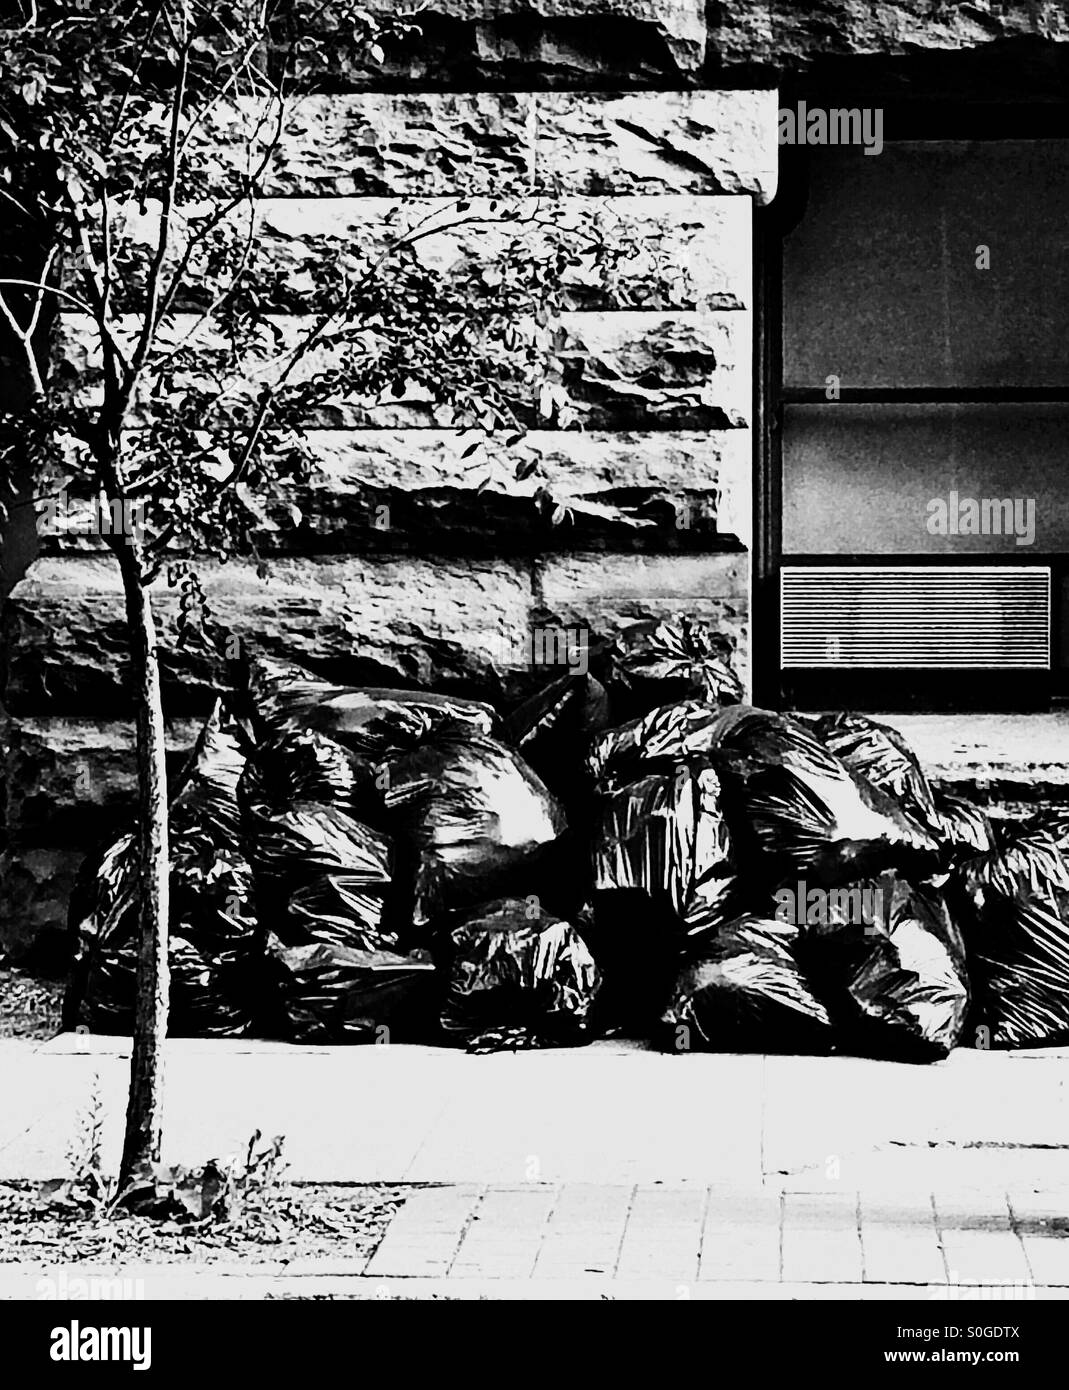 Garbage bags thrown against the stone wall of a government building. Stock Photo